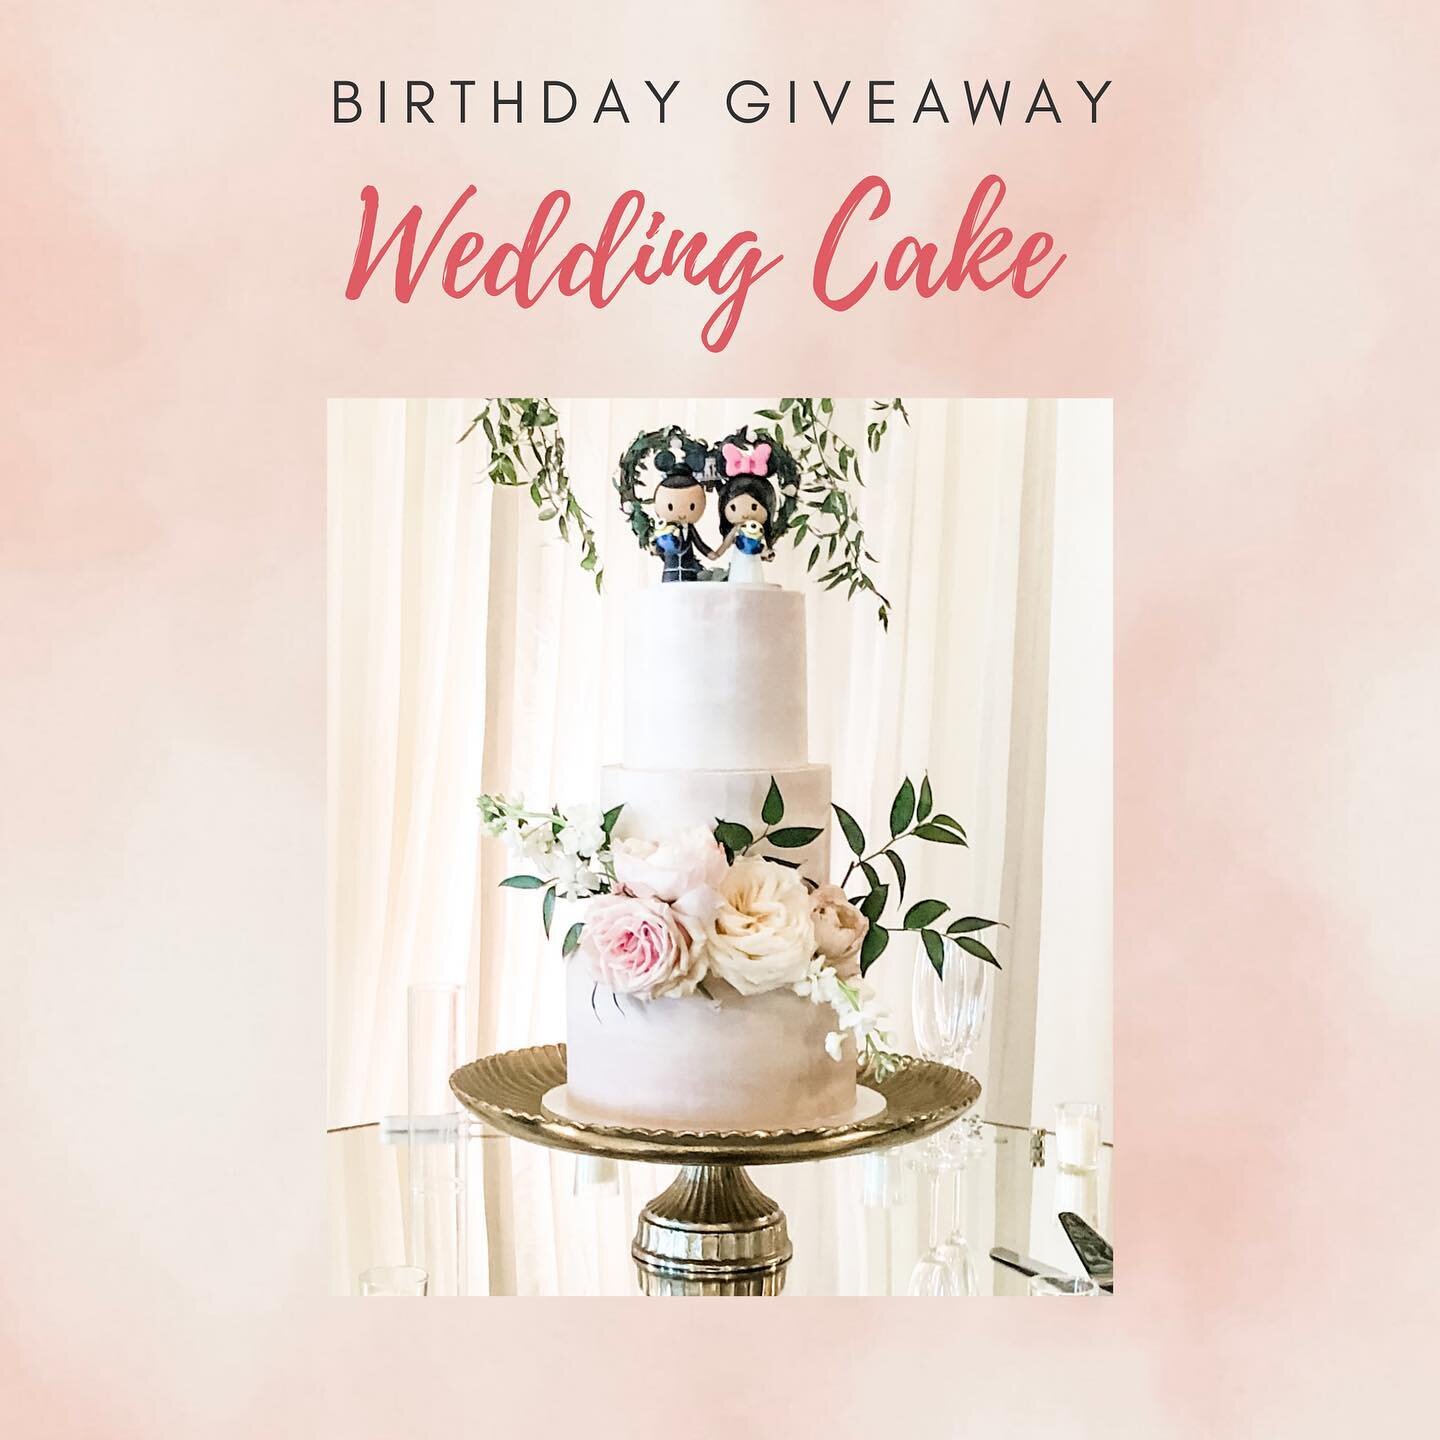 🎂THE FINAL BIRTHDAY GIVEAWAY 🎂

It&rsquo;s my birthday (7/2) and I&rsquo;ll cry if I want to&hellip; but I&rsquo;m having my cake and giving it away too! For my 33rd birthday weekend, we&rsquo;re doing 3 days of cake giveaways!

Today is last but n